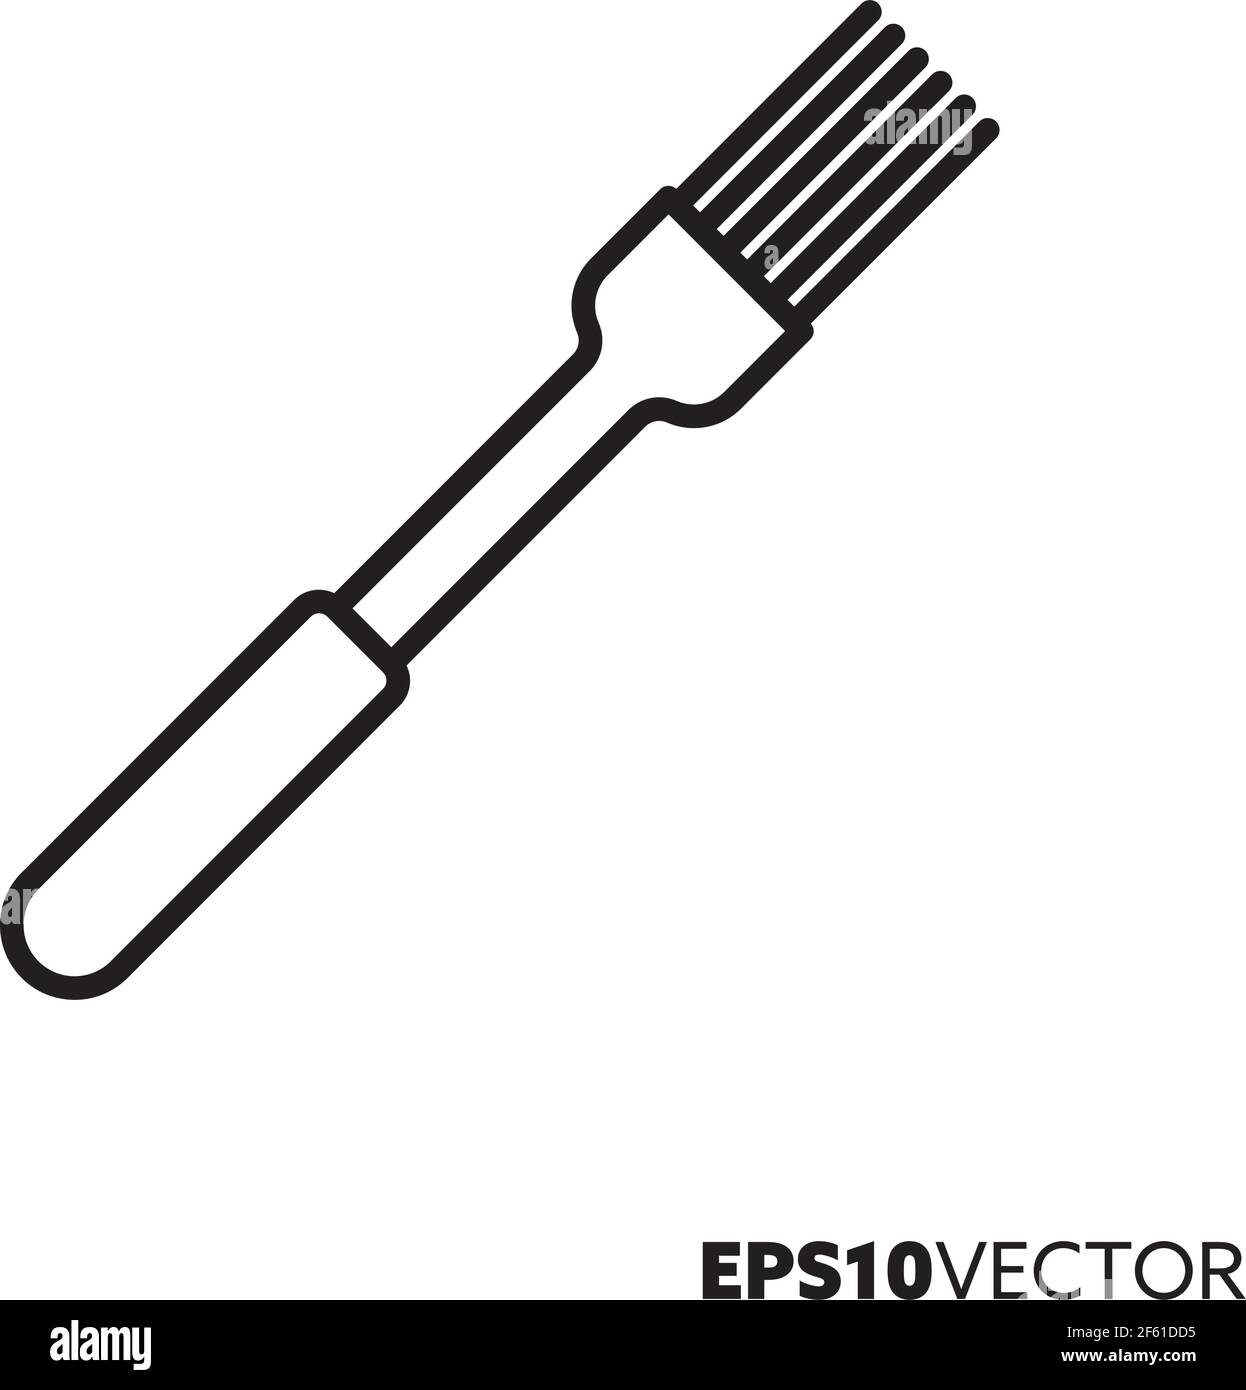 Silicone brush line icon. Outline symbol of barbecue, baking and cooking utensil. Kitchen equipment vector illustration. Stock Vector